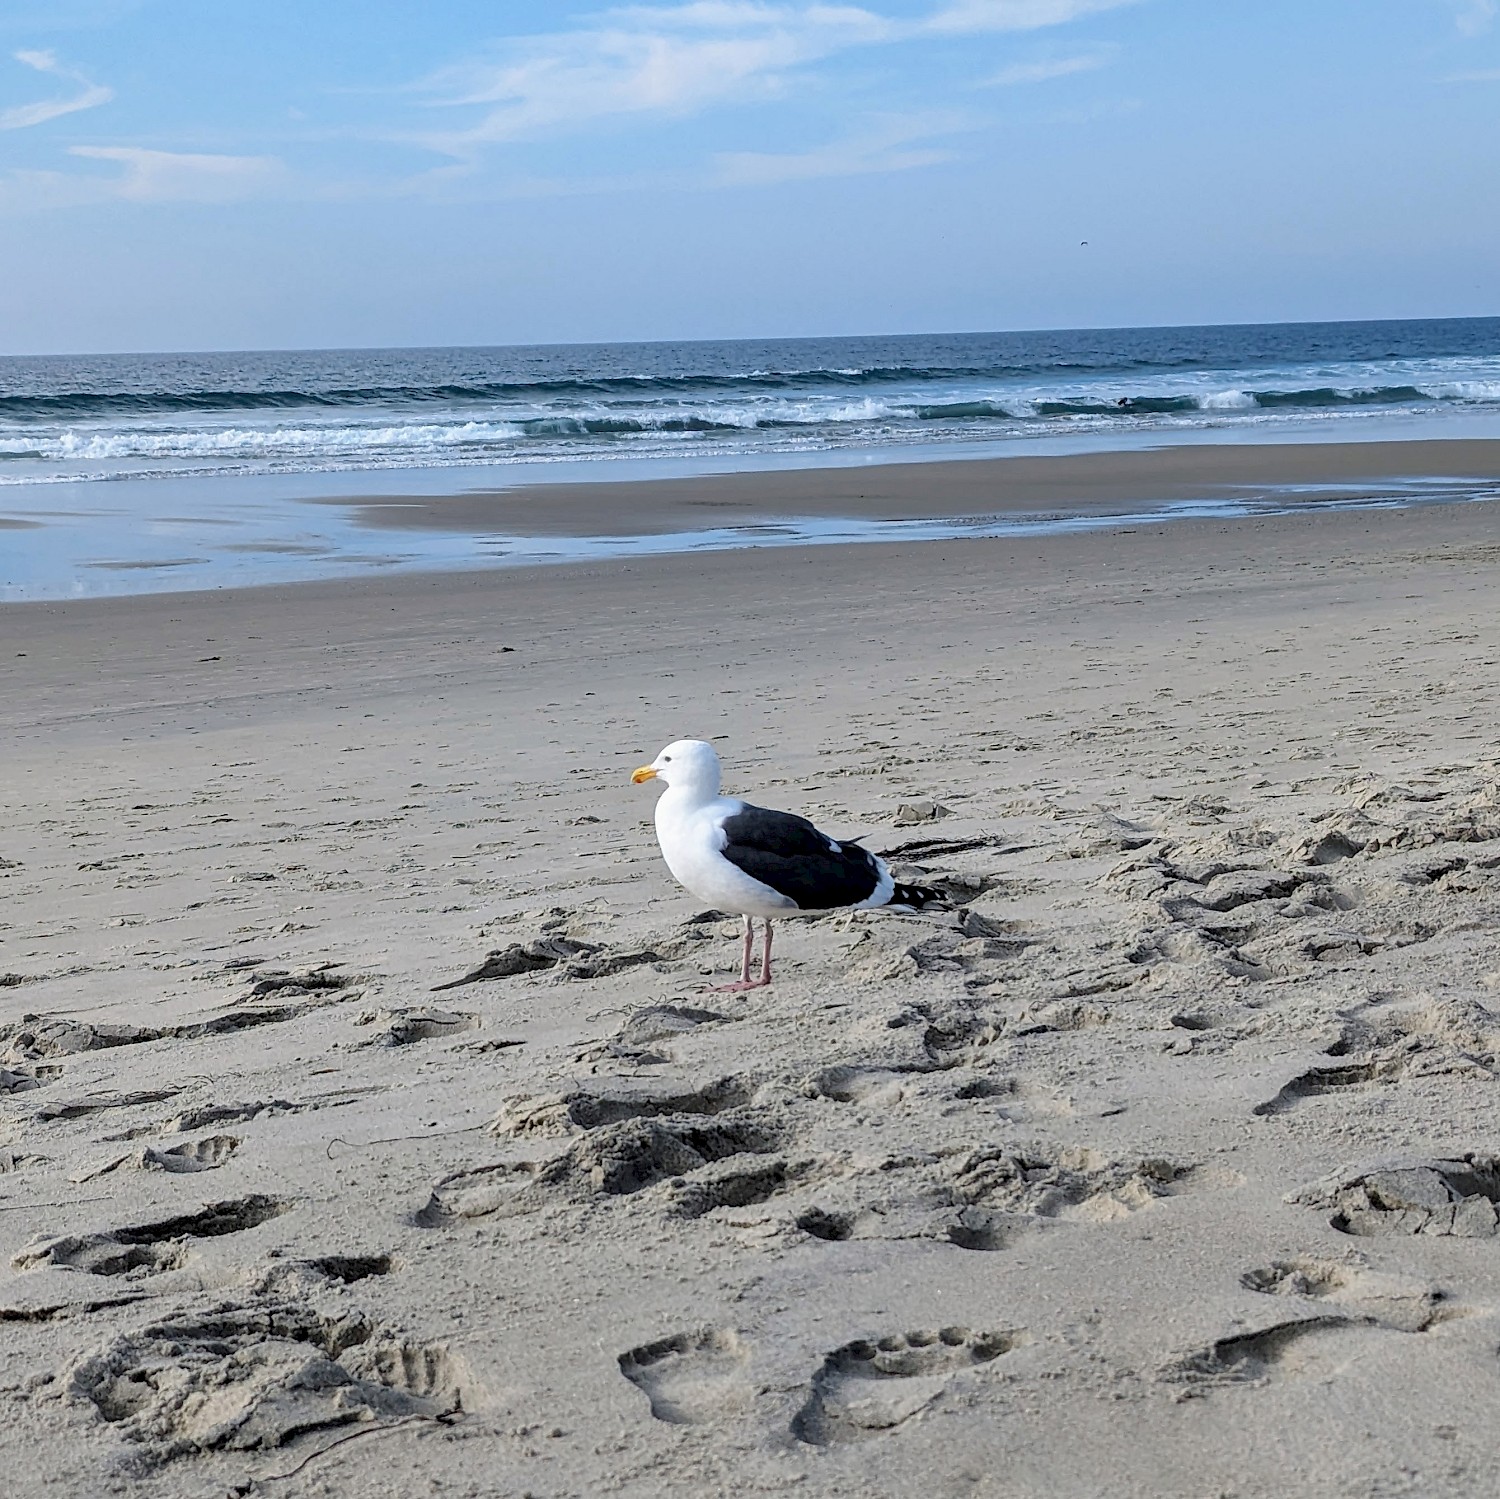 A lone seagull chilling on the beach